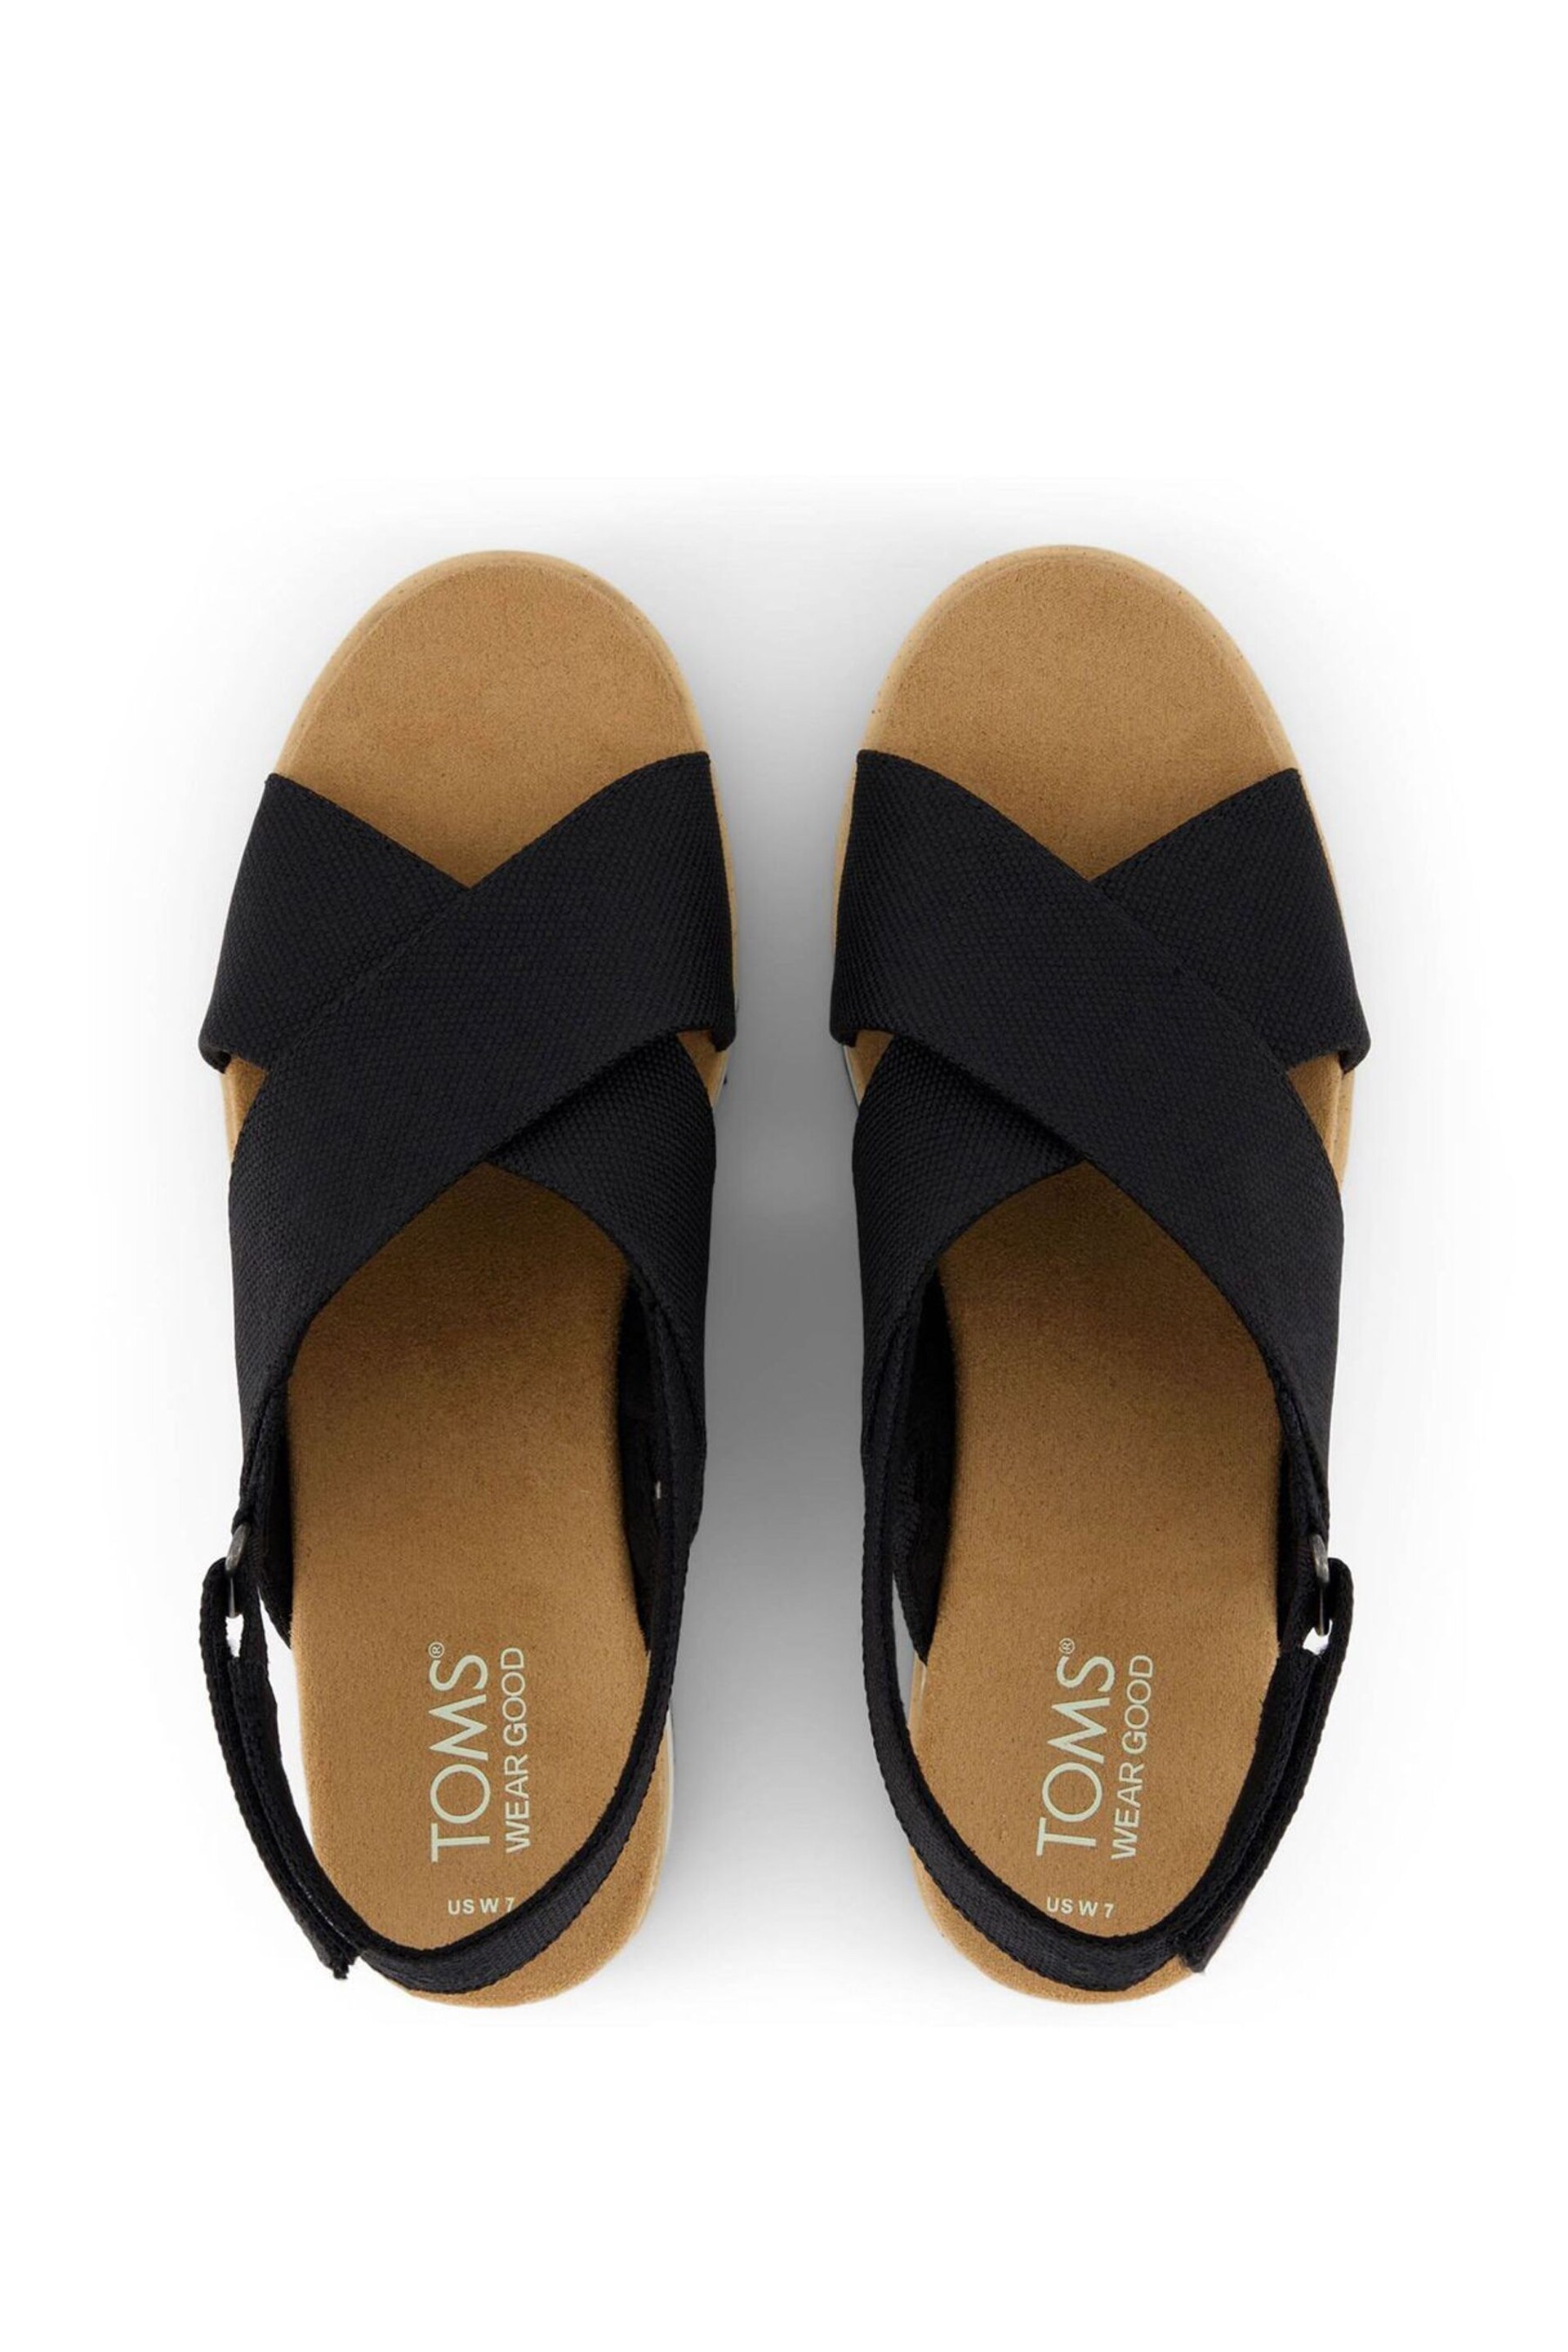 TOMS Natural Diana Crossover Sandals - Image 4 of 5